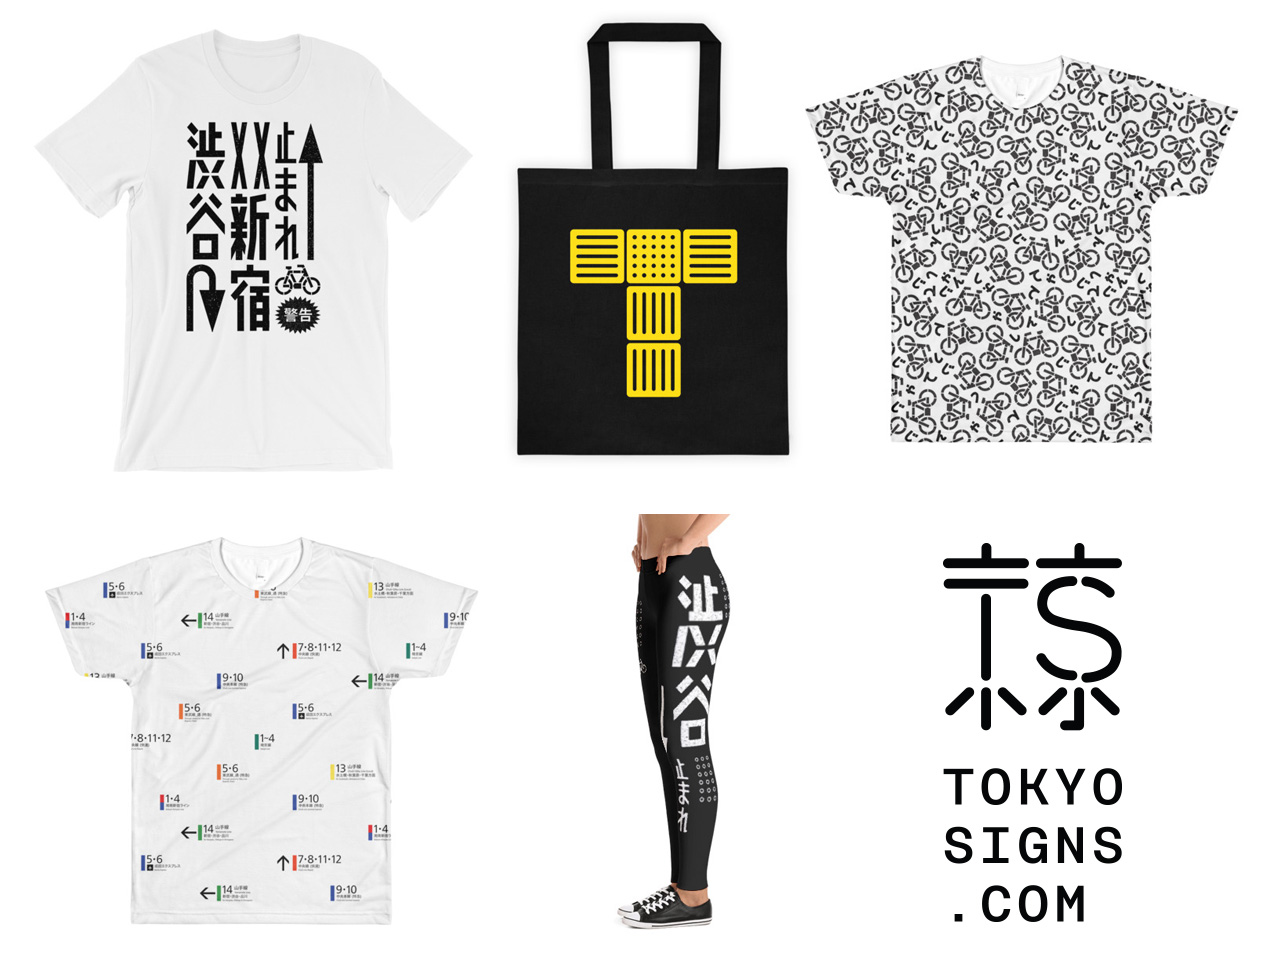 Tokyo Signs - Products inspired by the streets of Tokyo - Tshirt